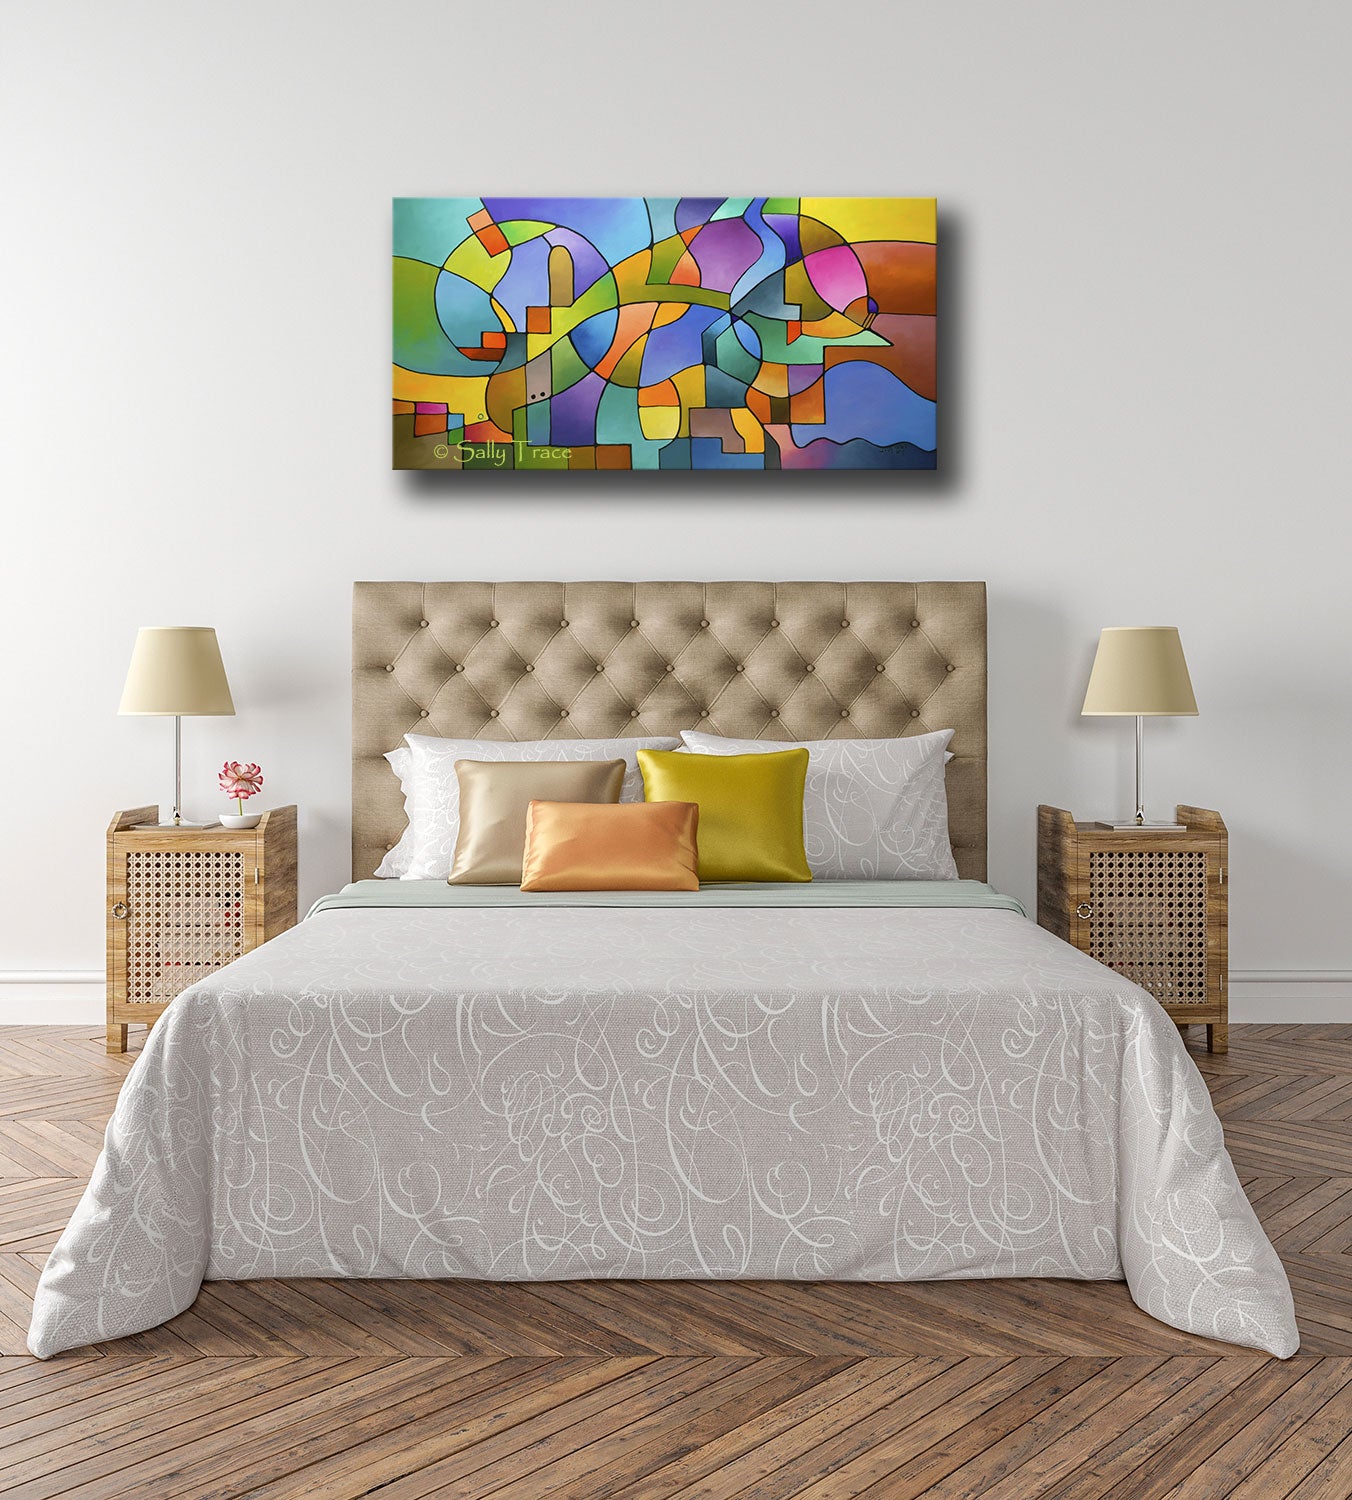 "Equilibrium" original geometric abstract painting for sale by Sally Trace, bedroom decor view